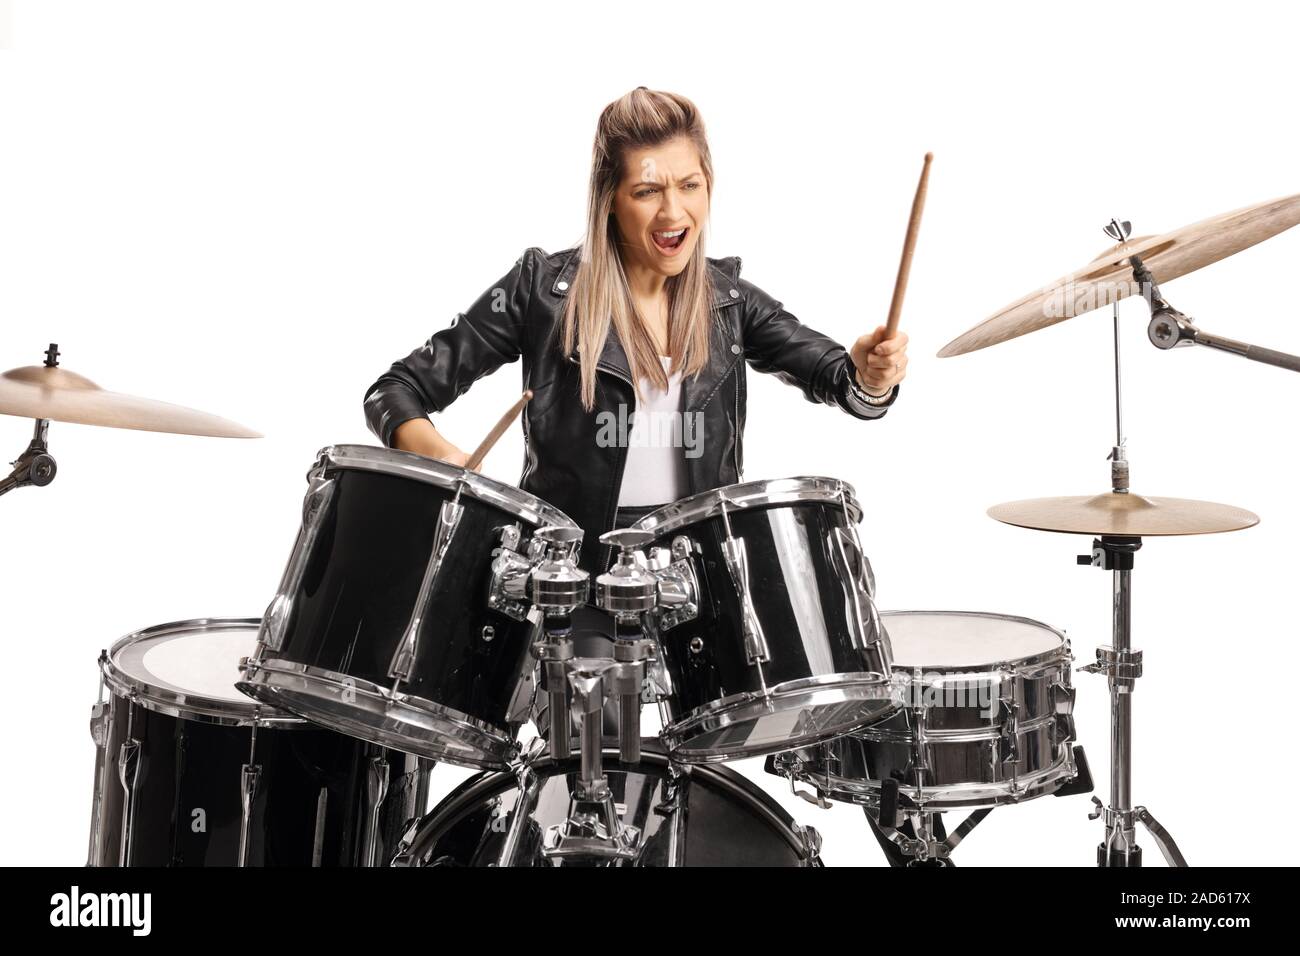 Female Drummer Playing On A Set Of Drums Isolated On White Background 2AD617X 